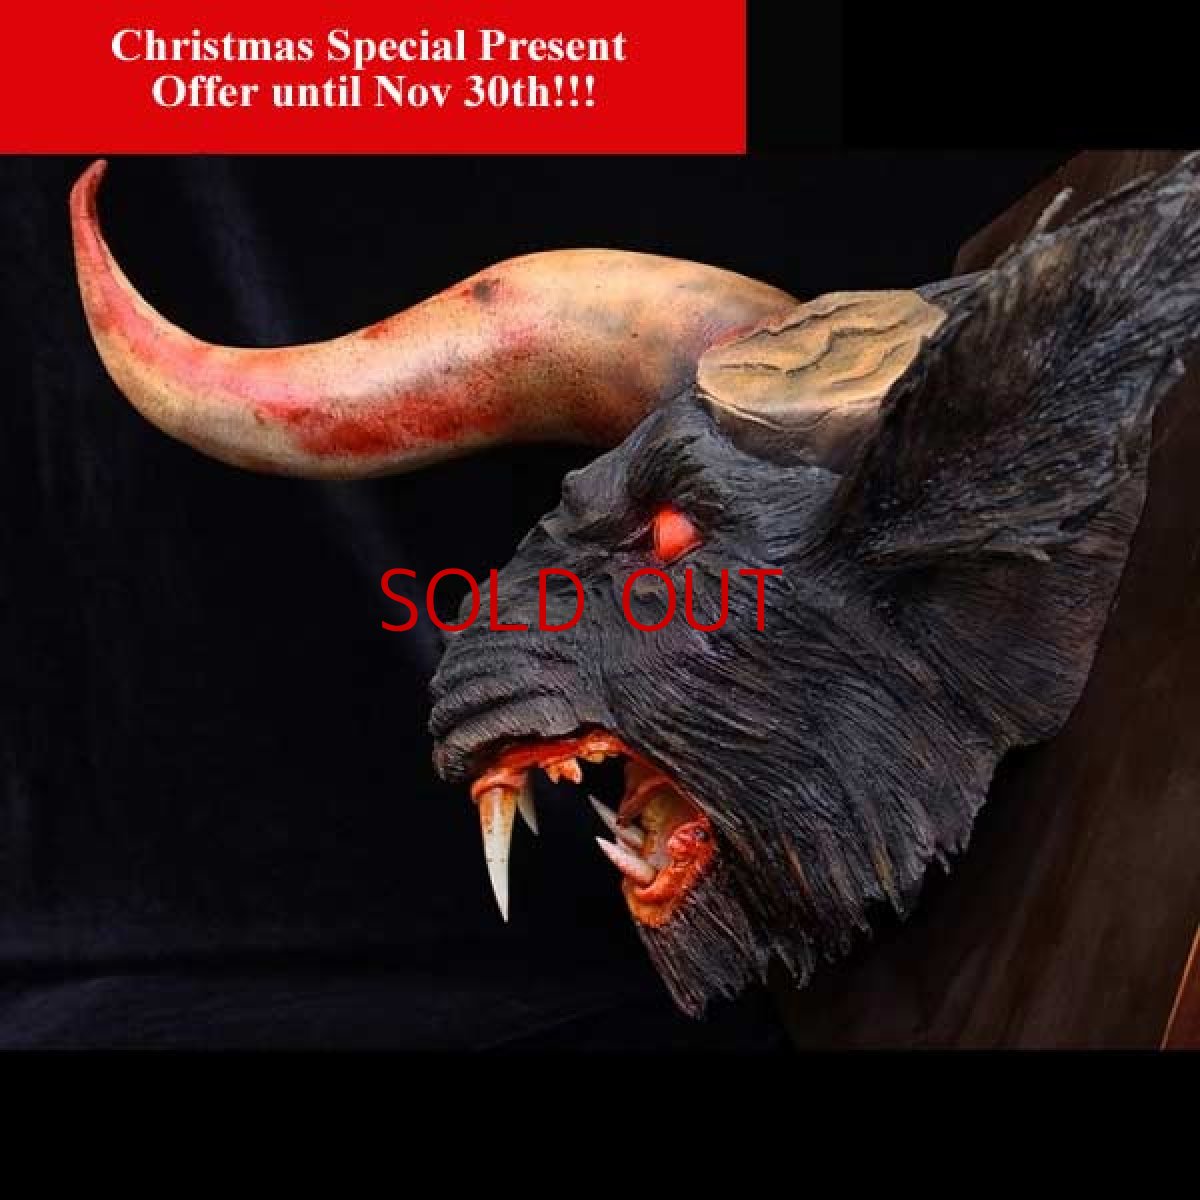 Photo1: No. 429 Trophy* Bloody Version (with attach of bloody bone)*Christmas Special Present Offer*Sold Out!!! (1)